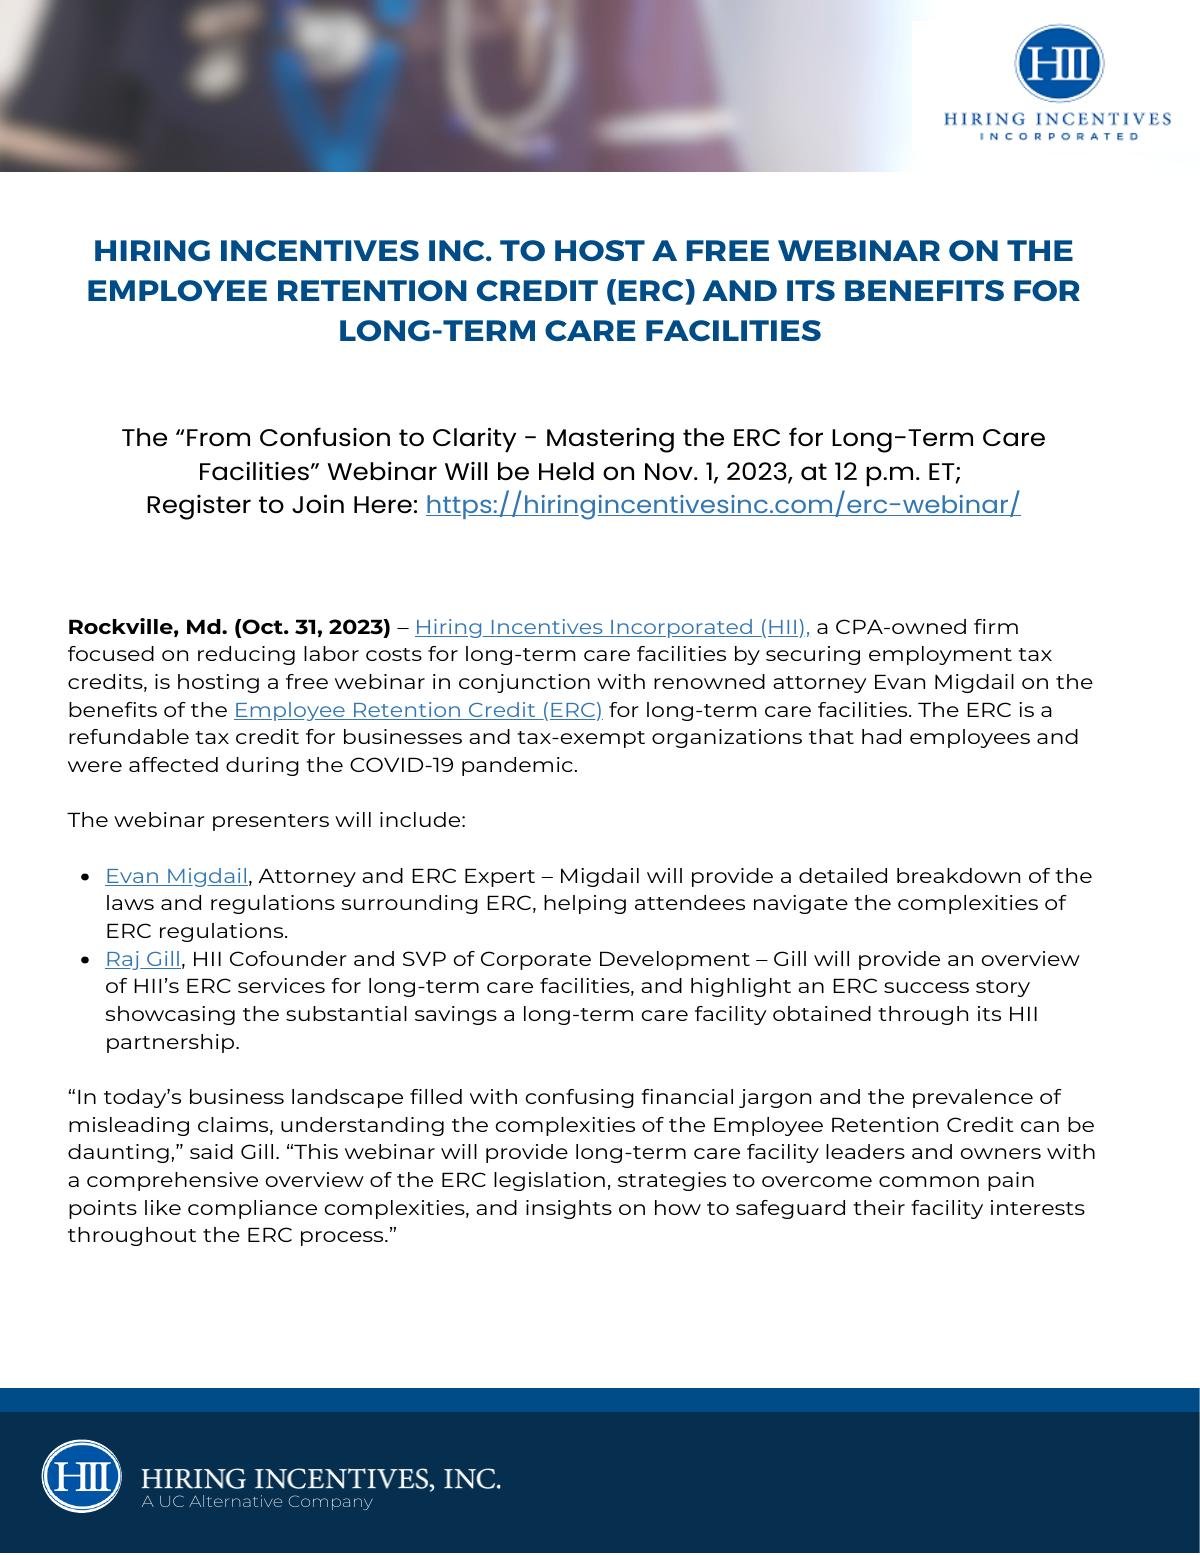 Hiring Incentives Inc. to Host a Free Webinar on the Employee Retention Credit (ERC) and Its Benefits for Long-Term Care Facilities